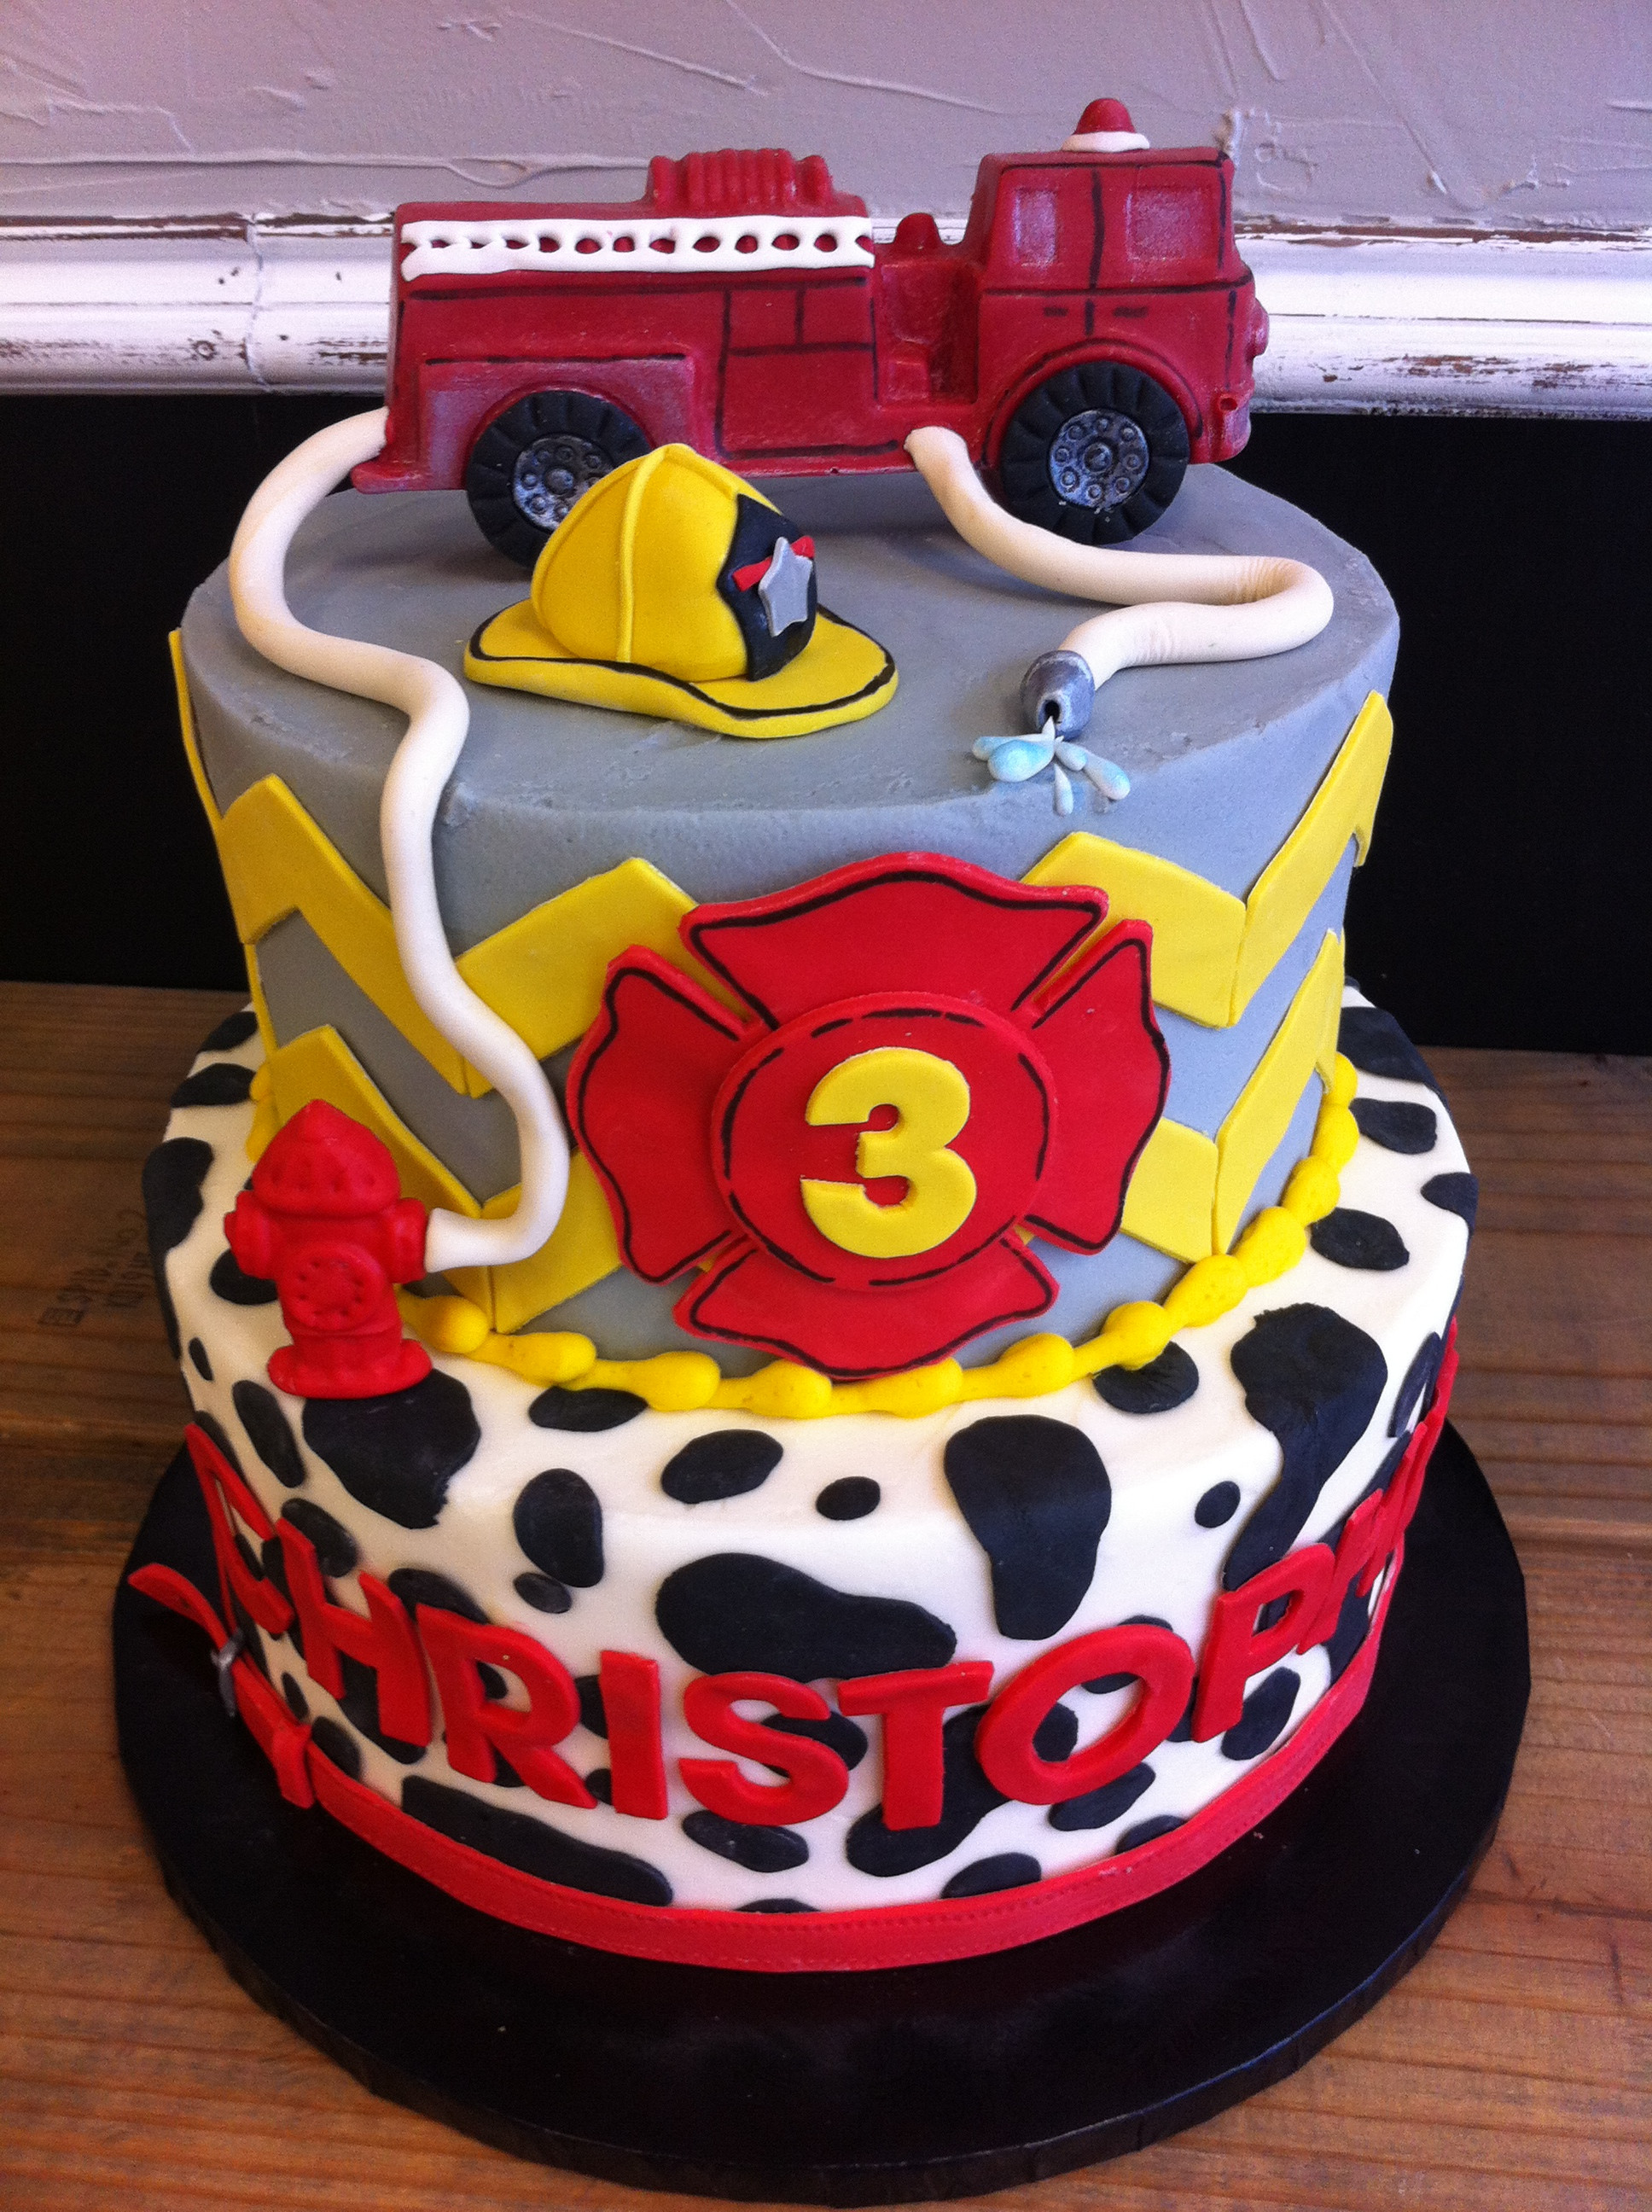 Firefighter Birthday Cake
 Party cakes in McKinney and Dallas Texas